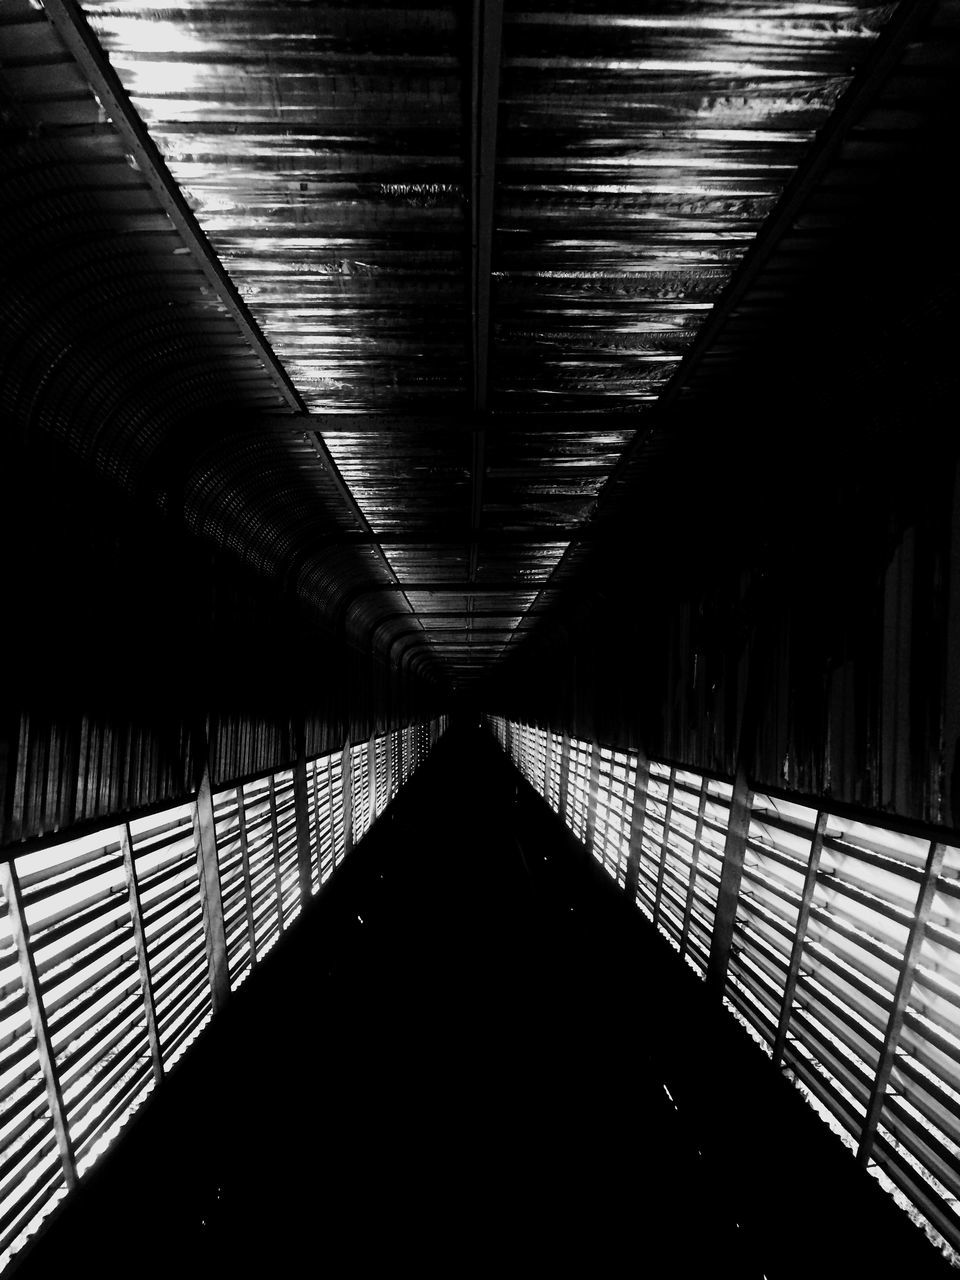 architecture, built structure, indoors, the way forward, railing, diminishing perspective, modern, illuminated, pattern, low angle view, city, connection, bridge - man made structure, building exterior, no people, shadow, vanishing point, repetition, ceiling, in a row